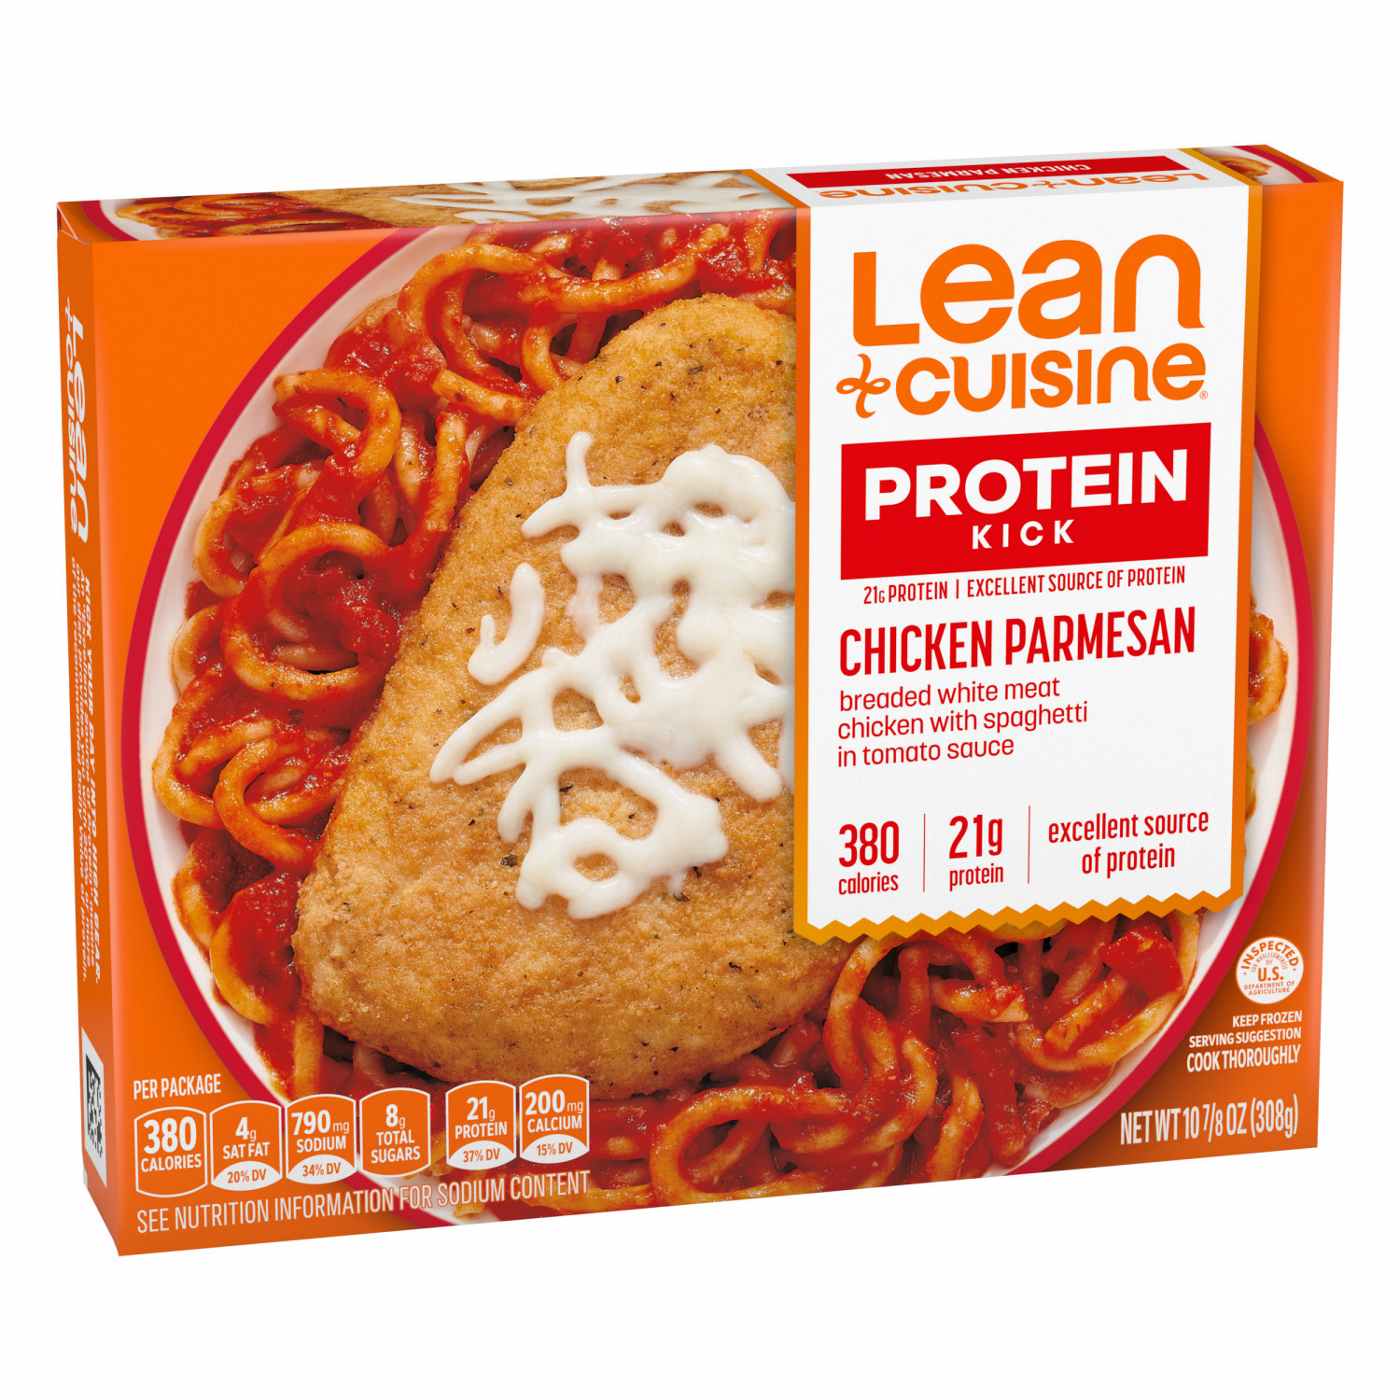 Lean Cuisine 21g Protein Chicken Parmesan Frozen Meal; image 6 of 7